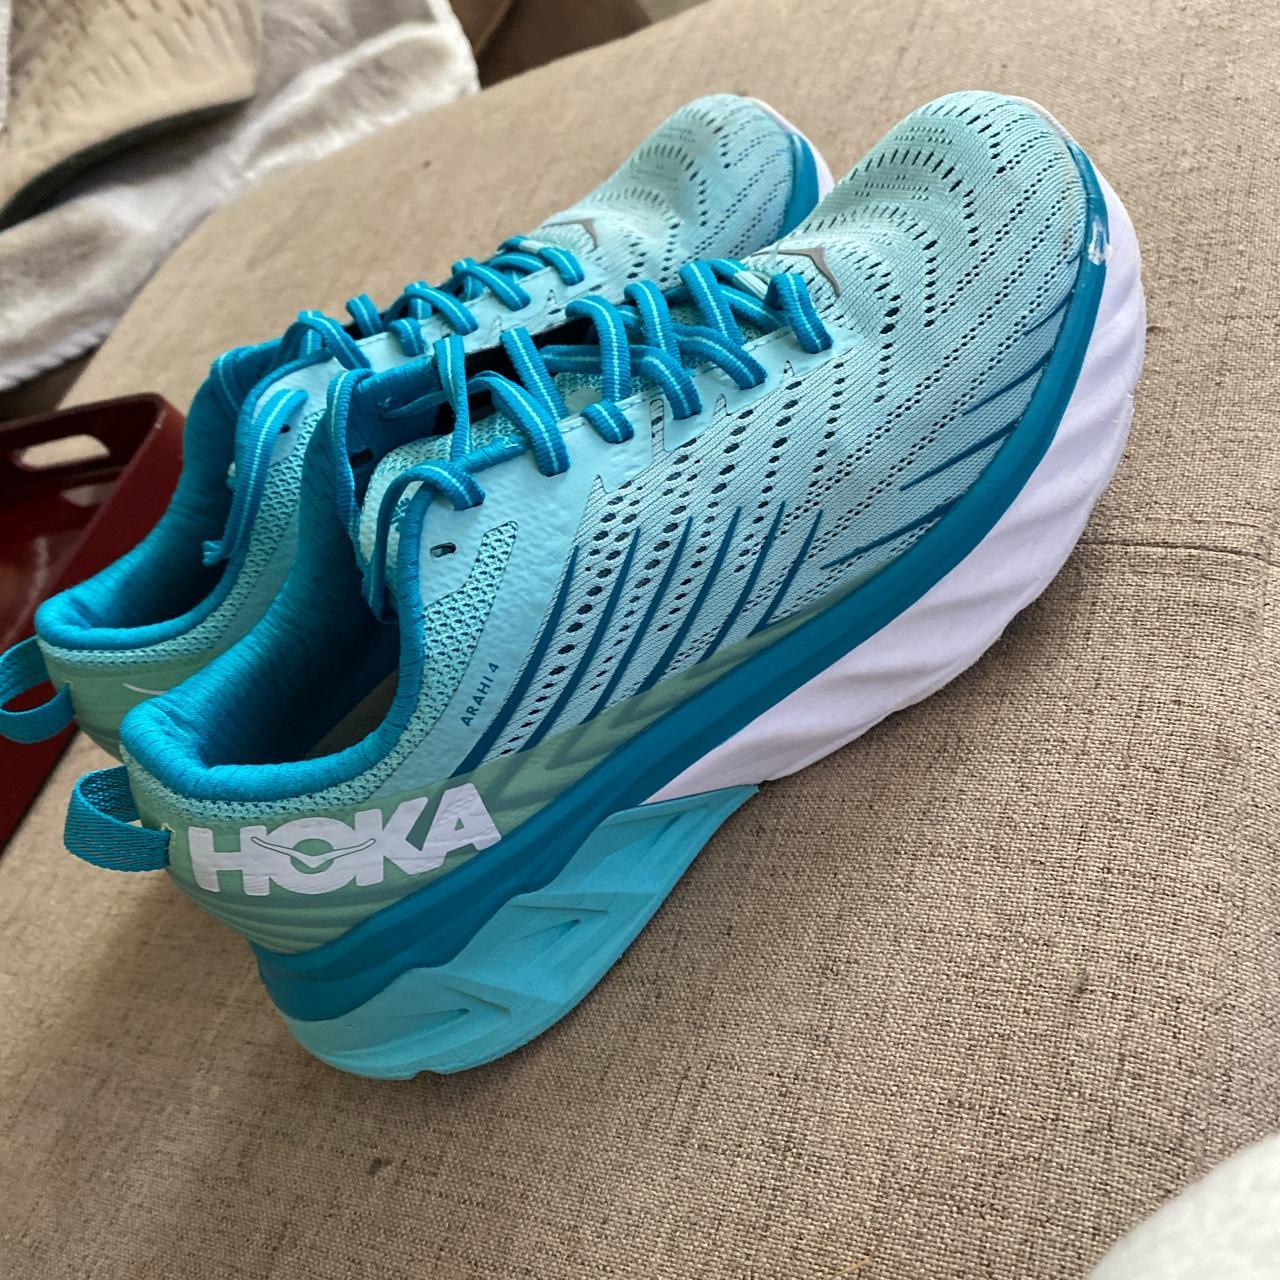 Hoka one one shoes size 8. They have a spot on the... - Depop